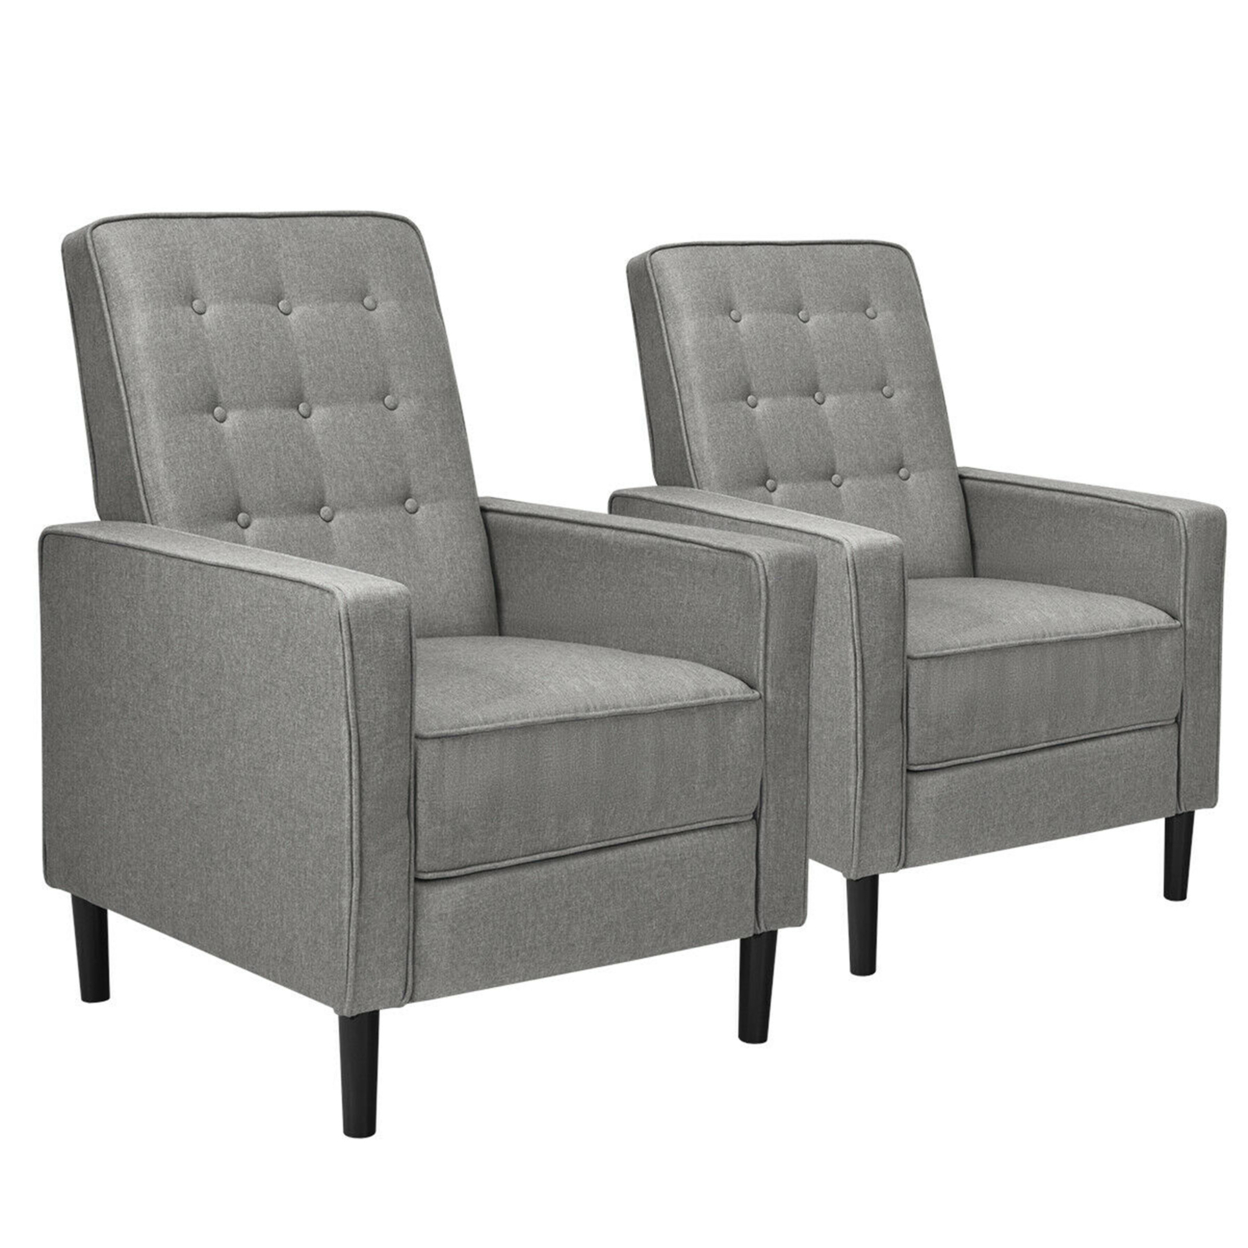 Set Of 2 Push Back Recliner Chair Fabric Tufted Single Sofa W/ Footrest - Grey